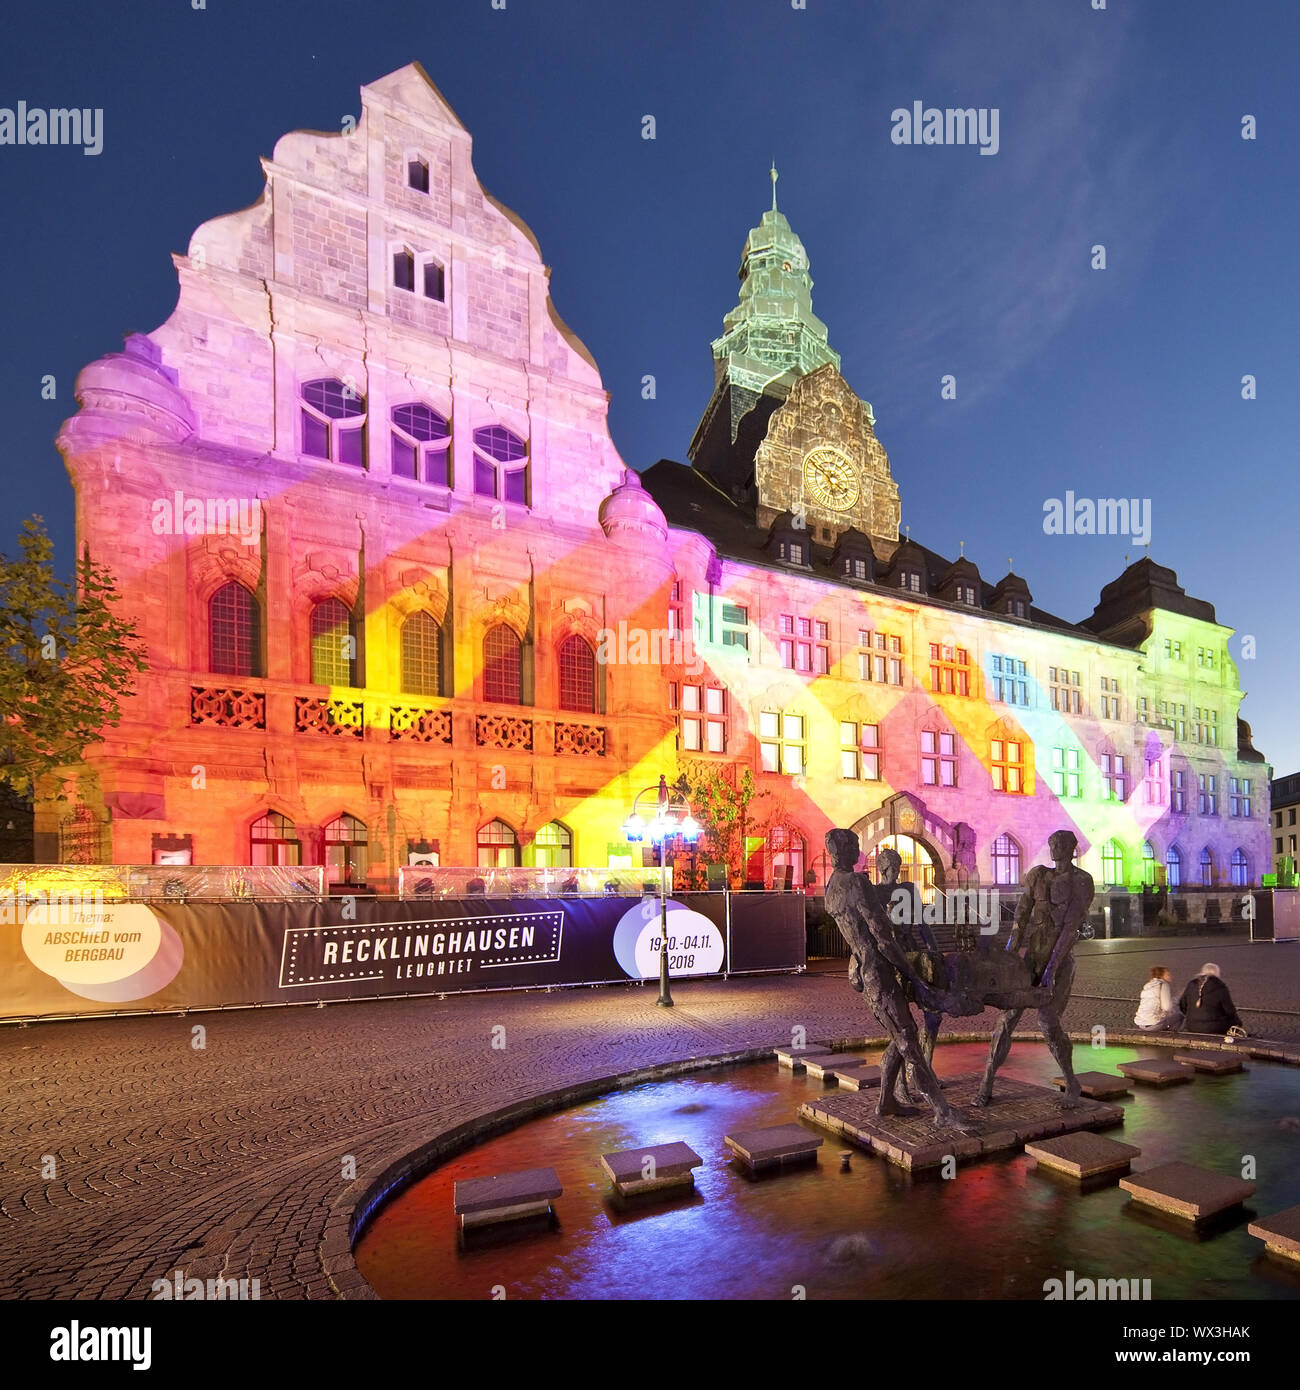 illuminated town hall in the evening, Recklinghausen illuminations, Recklinghausen, Germany, Europe Stock Photo